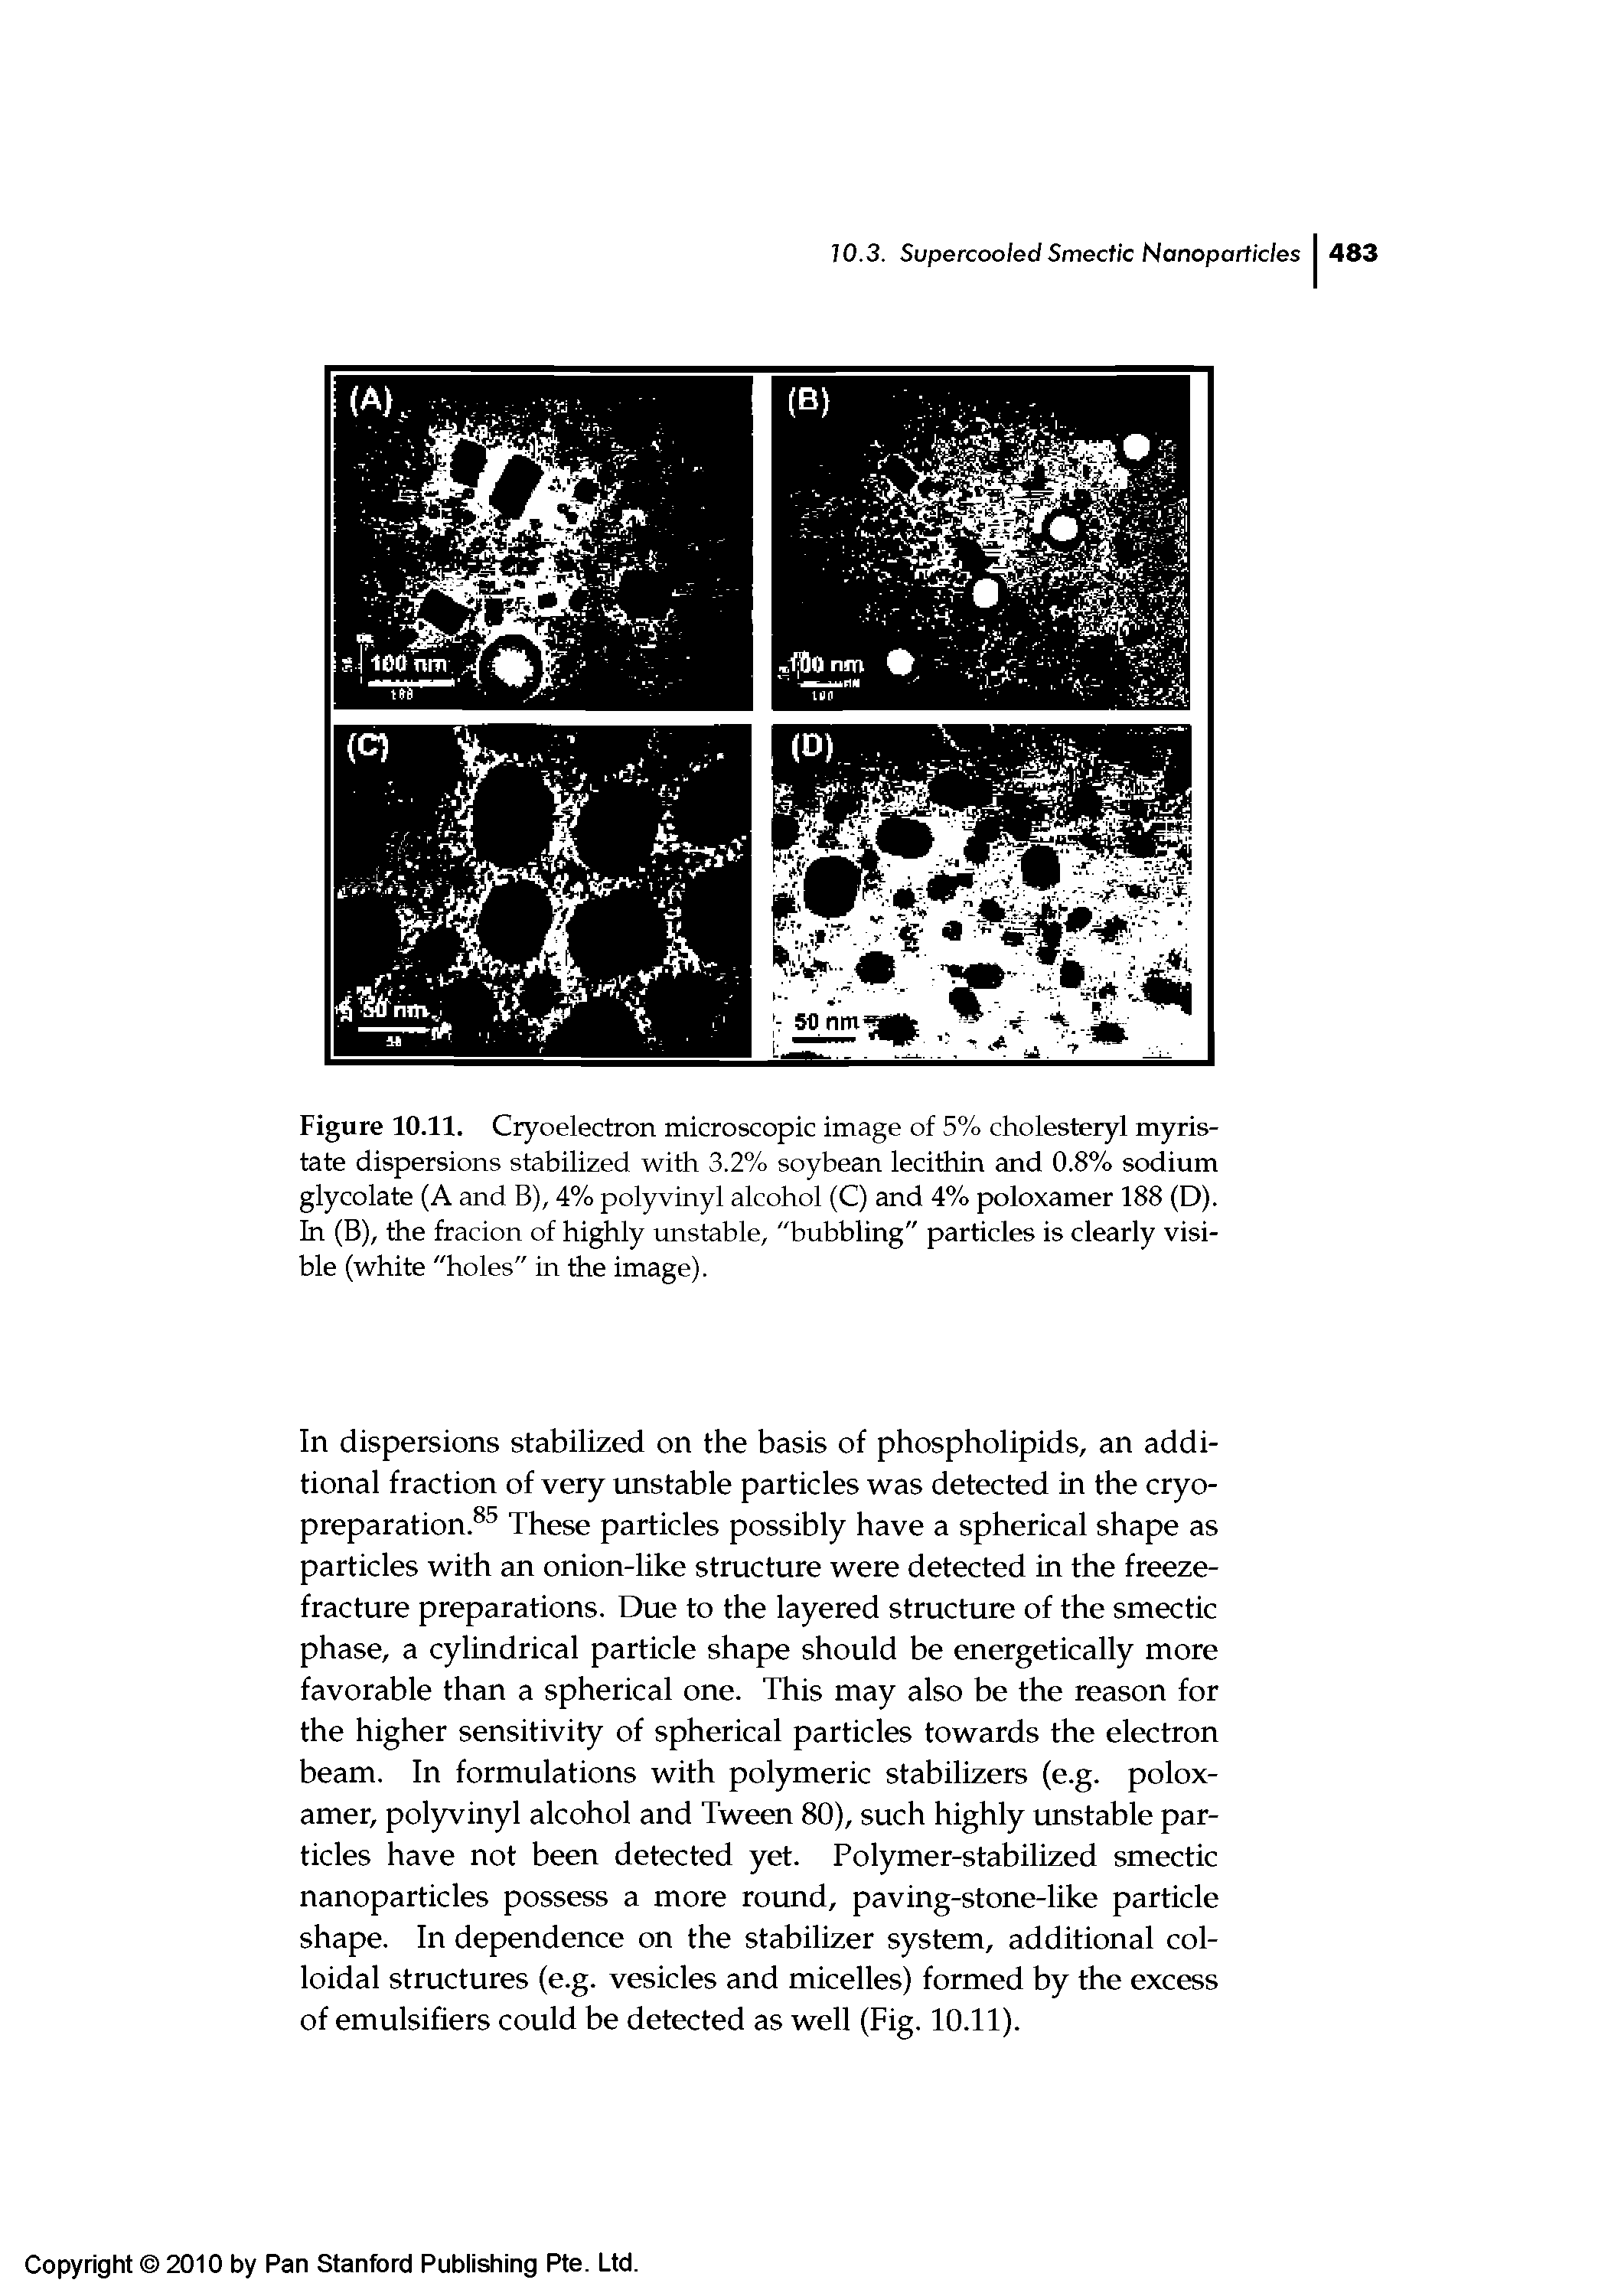 Figure 10.11. Cryoelectron microscopic image of 5% cholesteryl myiis-tate dispersions stabilized with 3.2% soybean lecithin and 0.8% sodium glycolate (A and B), 4% polyvinyl alcohol (C) and 4% poloxamer 188 (D). In (B), the fracion of highly unstable, "bubbling" particles is clearly visible (white "holes" in the image).